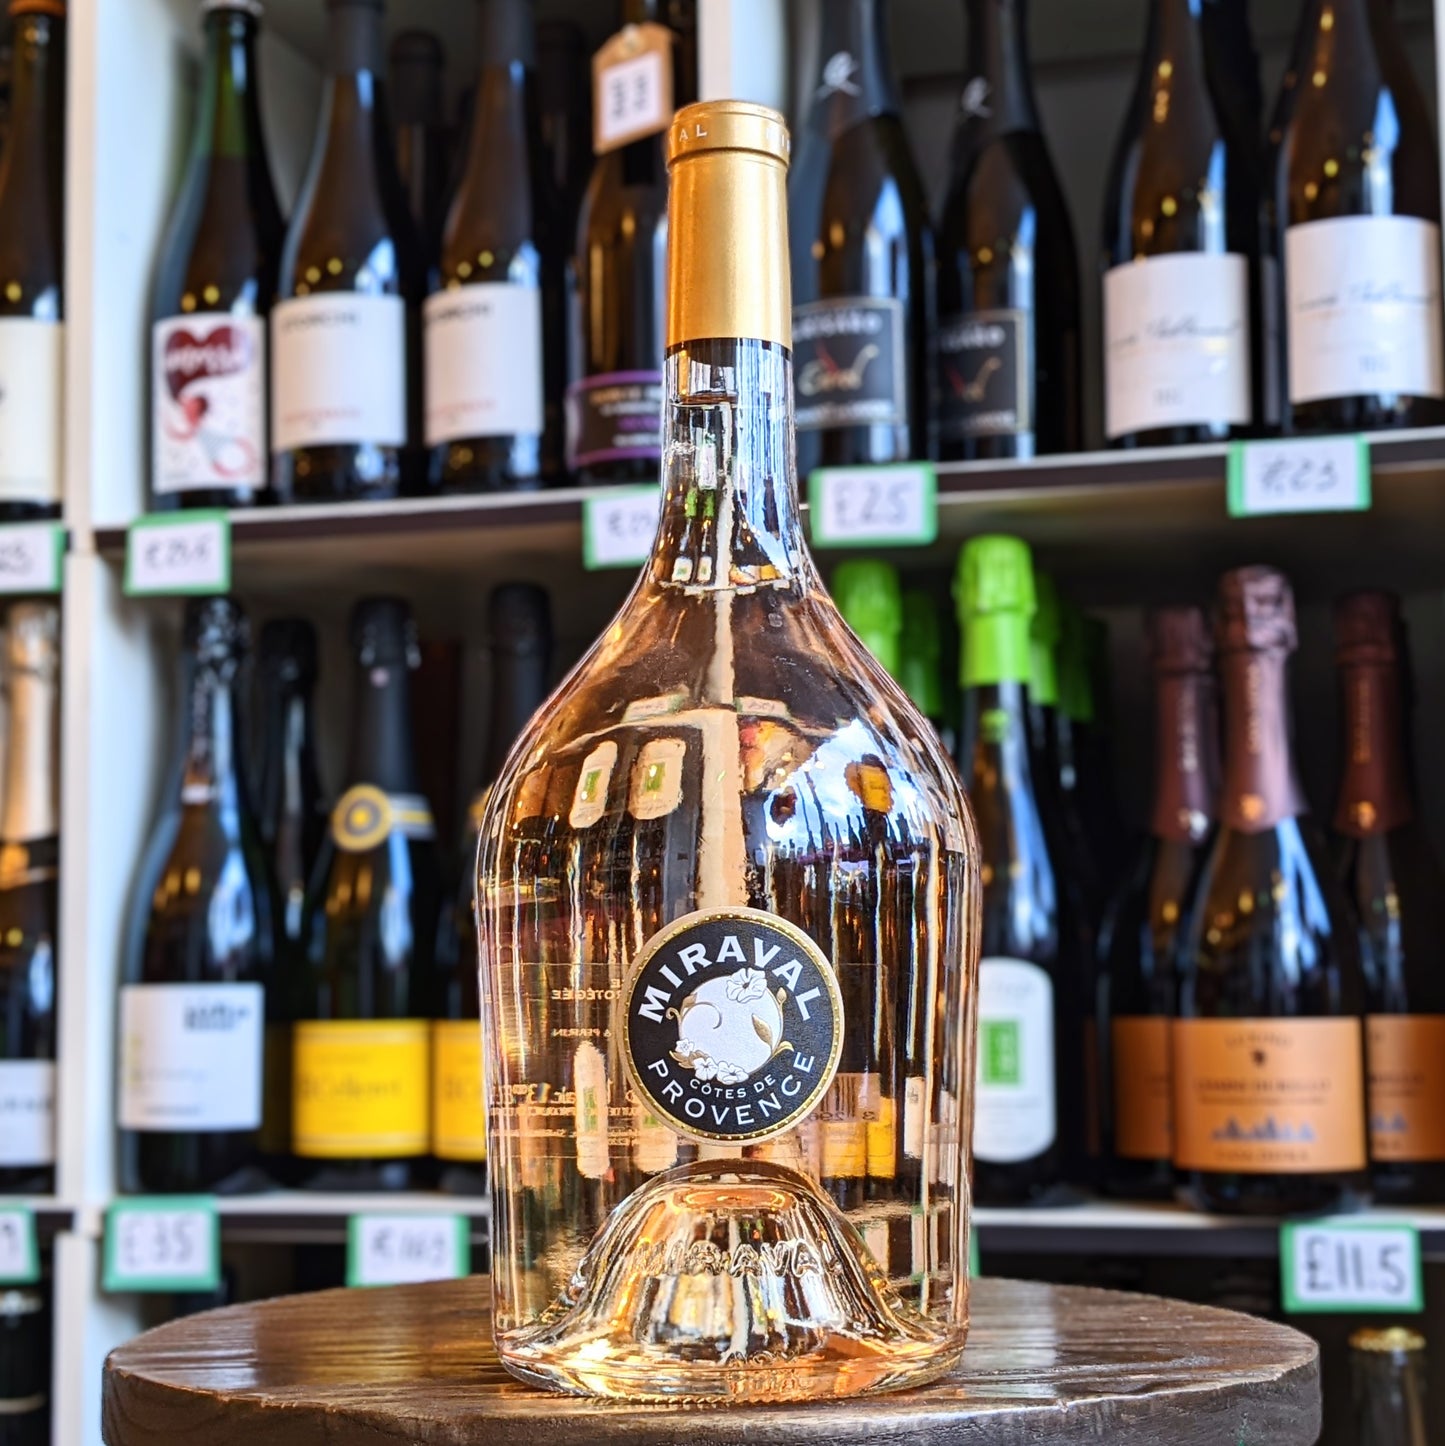 Chateau Miraval, Miraval Rose, Provence, France (Magnum)